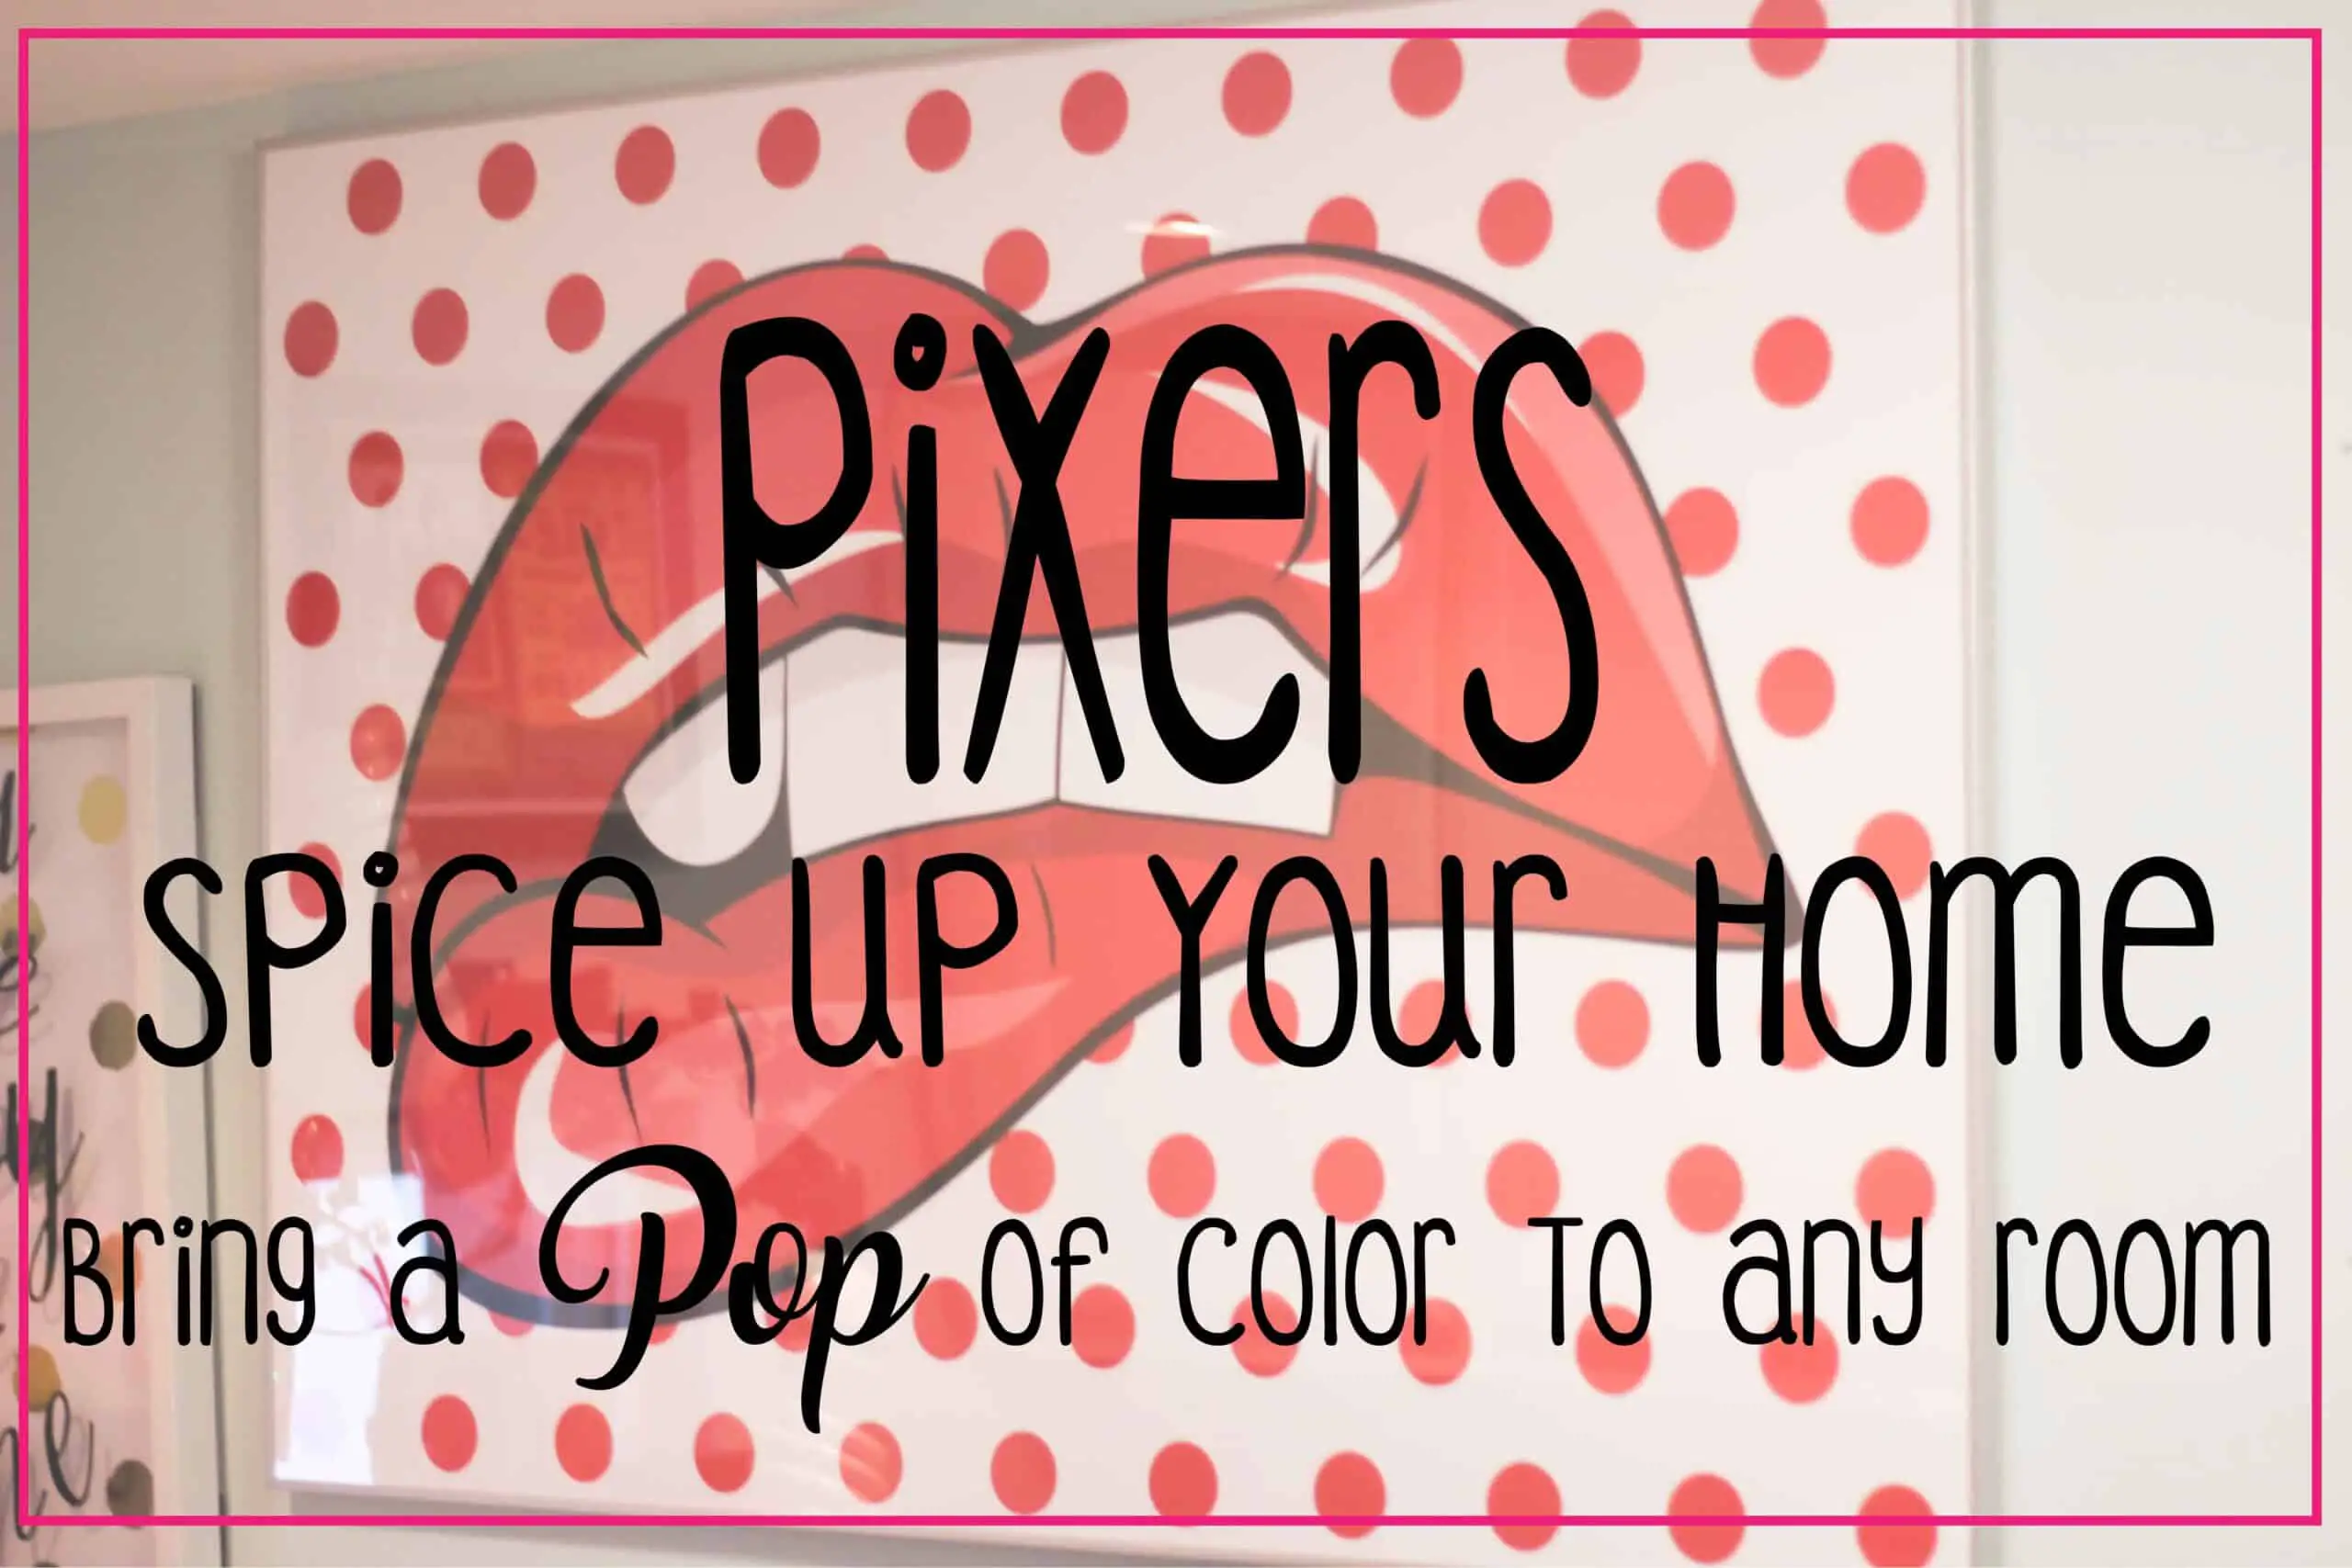 Spice Up Your Home With PIXERS